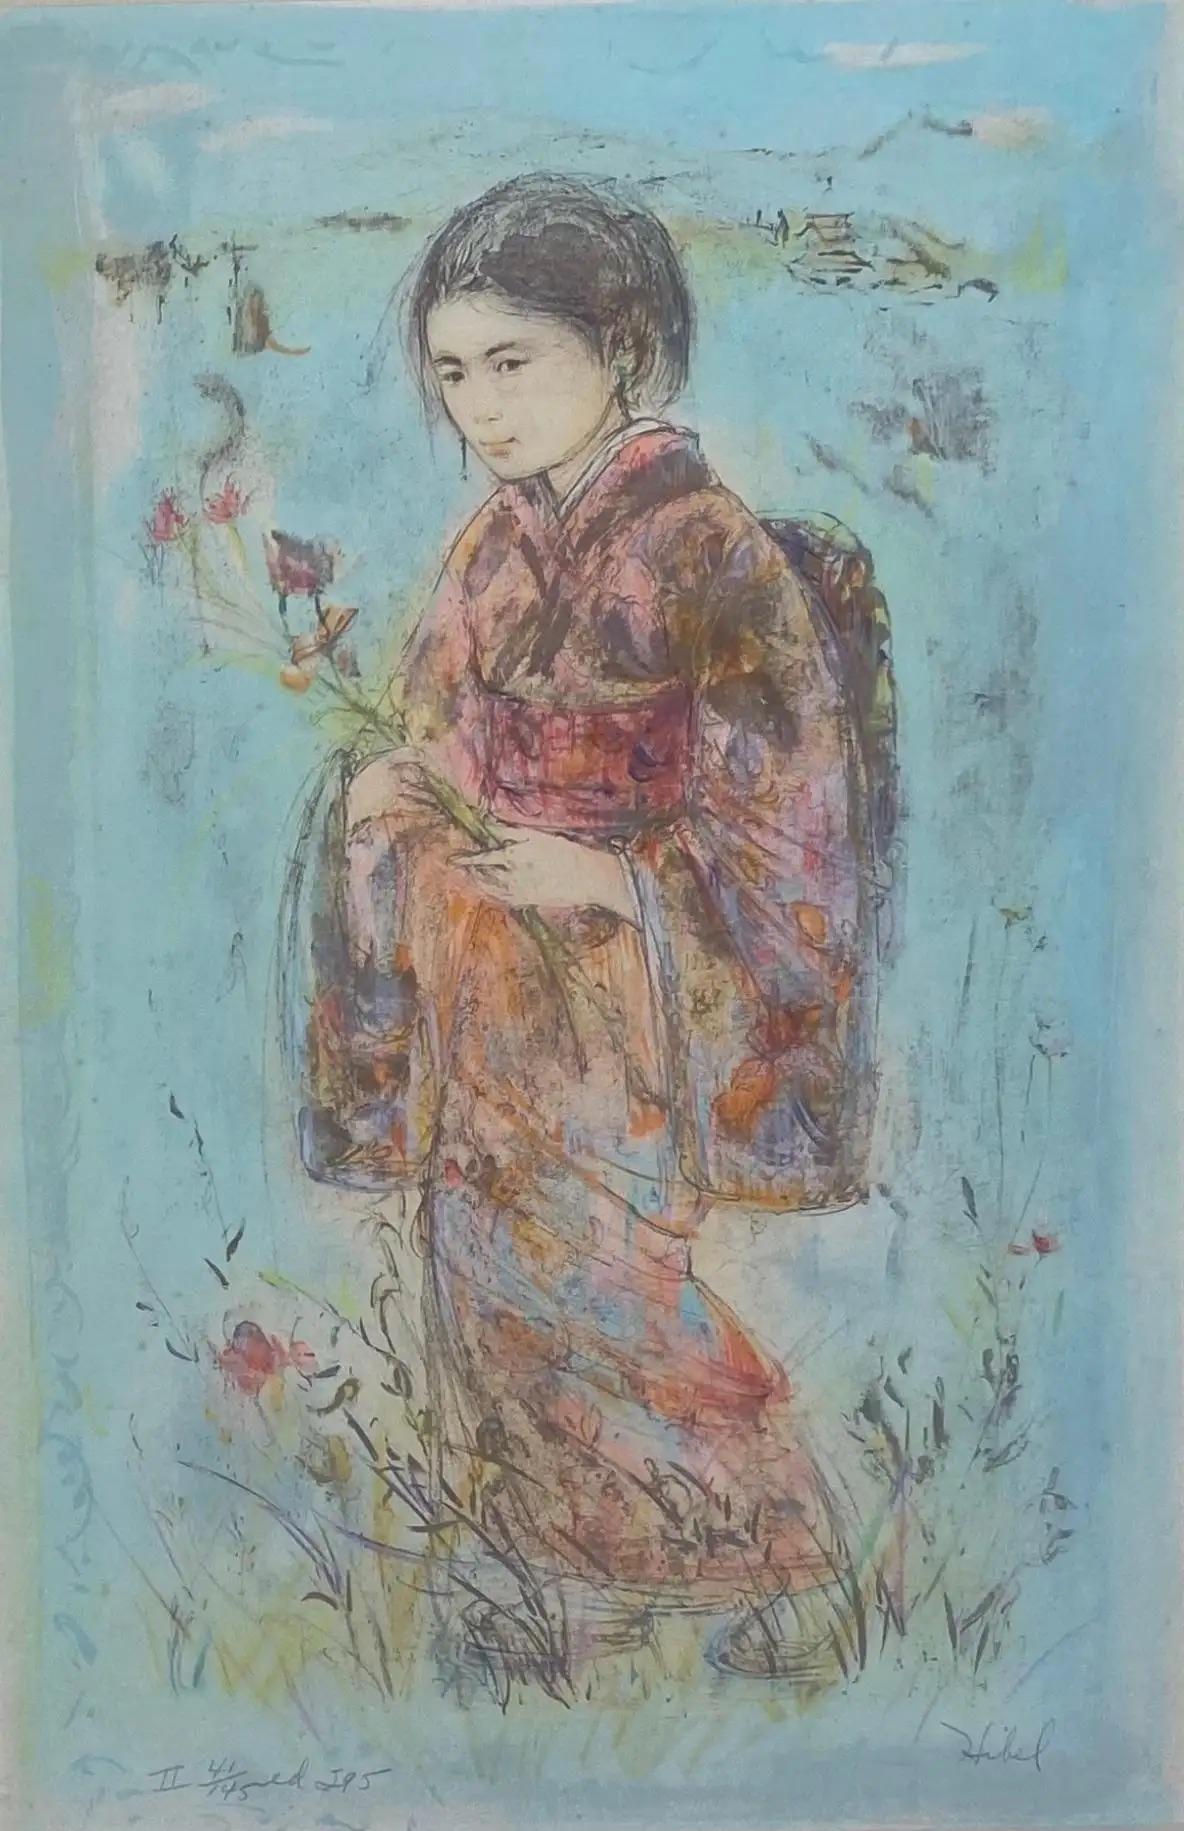 A stunning piece of decorative art by Edna Hibel featuring a young girl dressed in a traditional Japanese kimono.
 
Edna Hibel: 1917-2015. Well listed important American artist. Mostly associated with Florida and Massachusetts. There is a Hibel